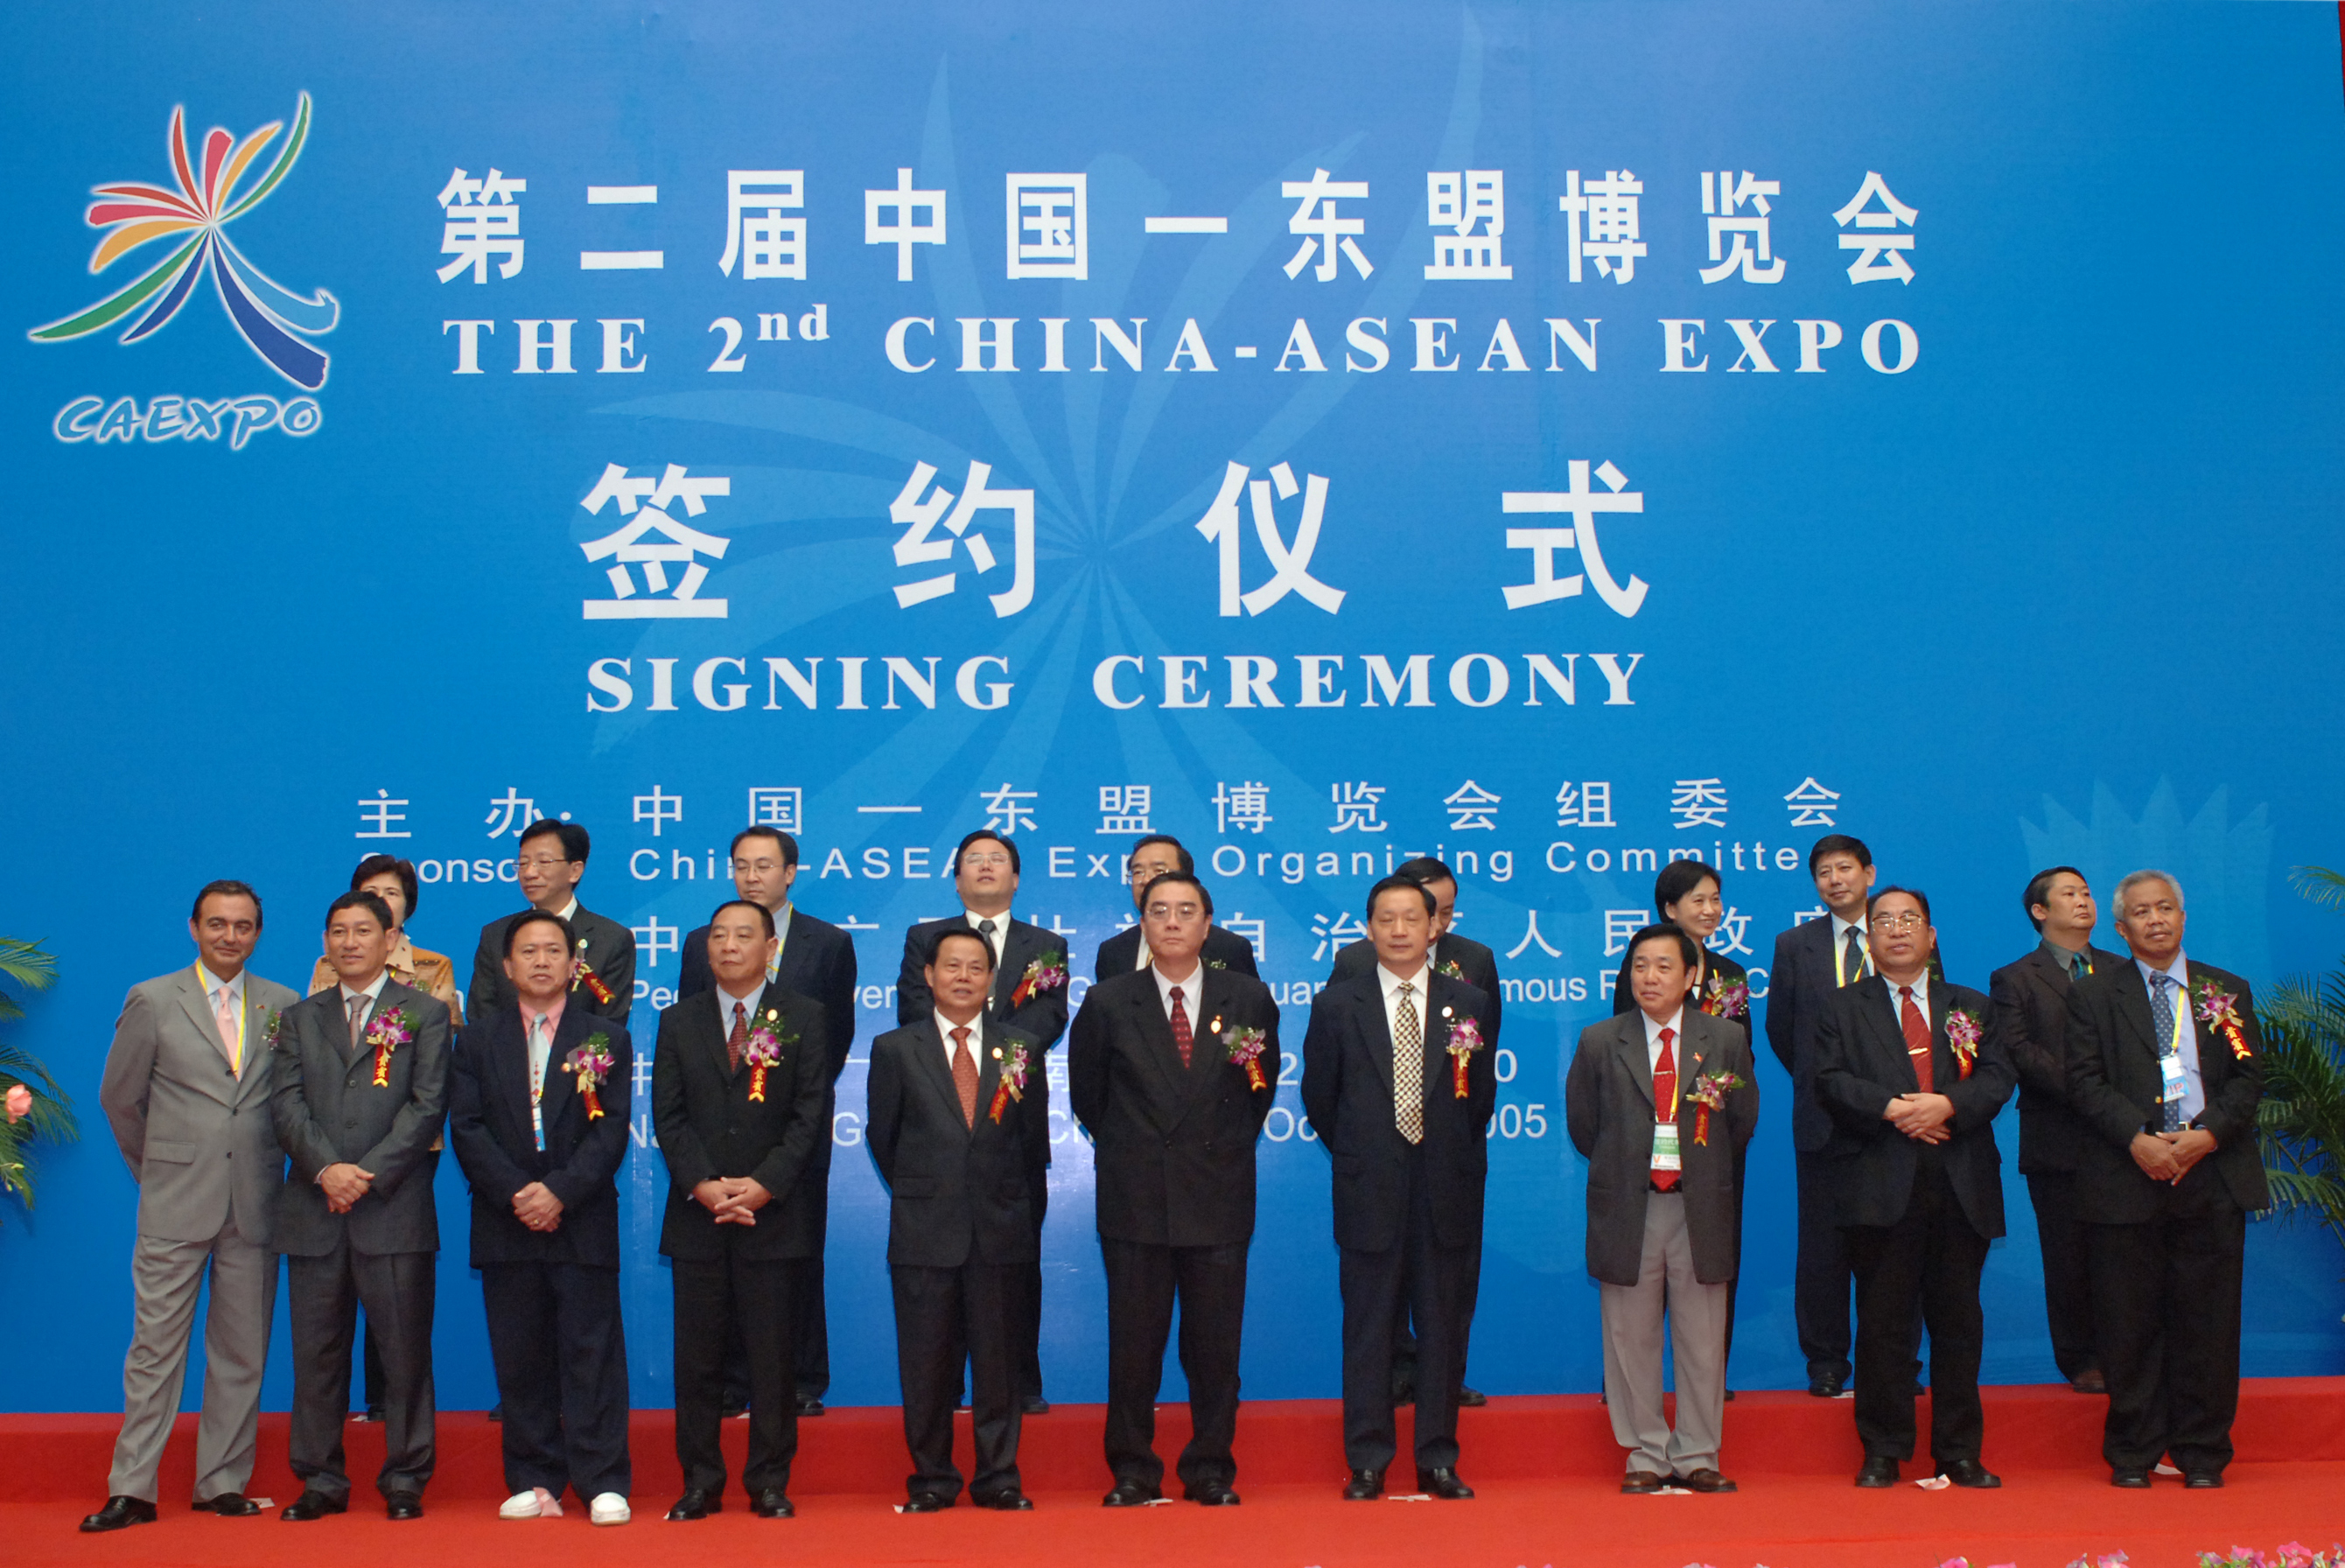 The second China-ASEAN Expo